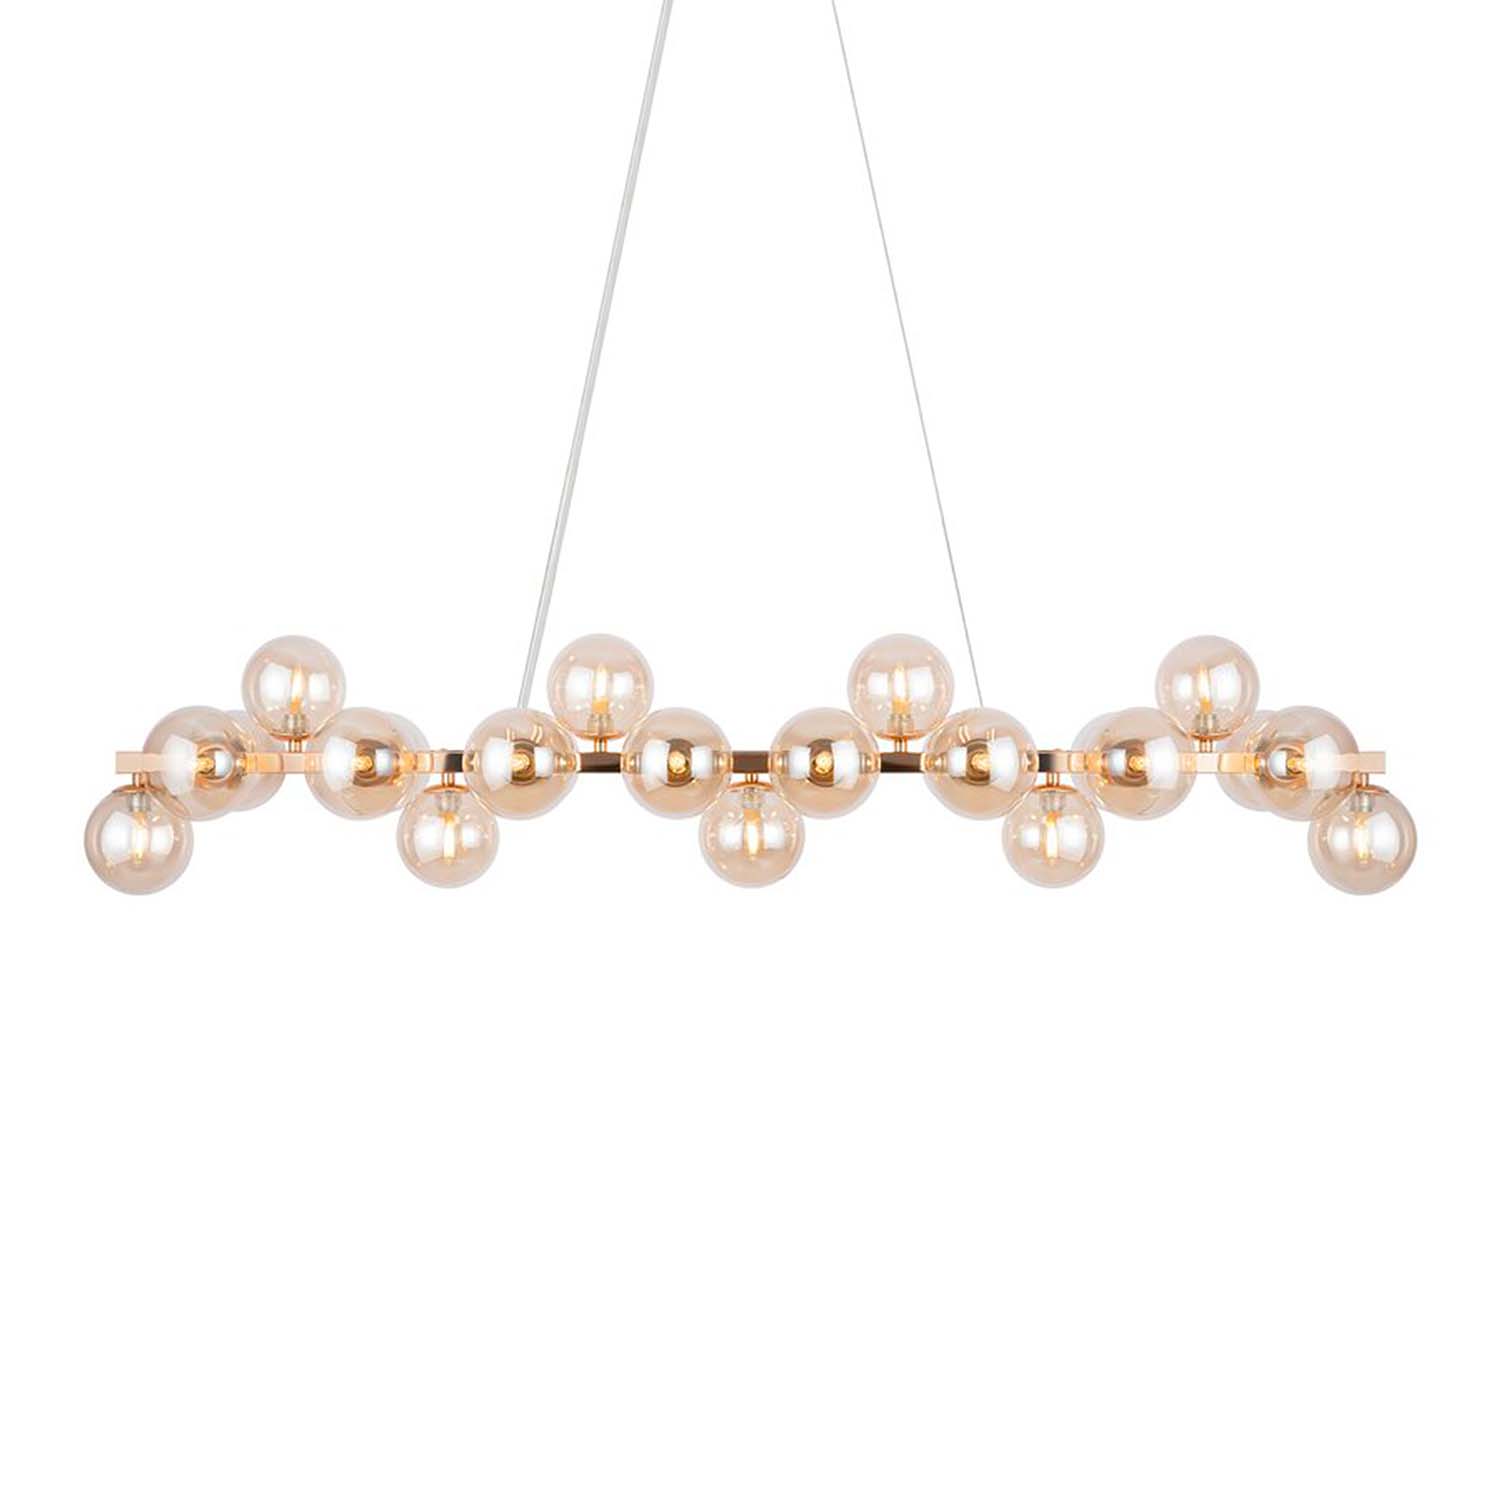 DALLAS - Long chandelier with glass balls